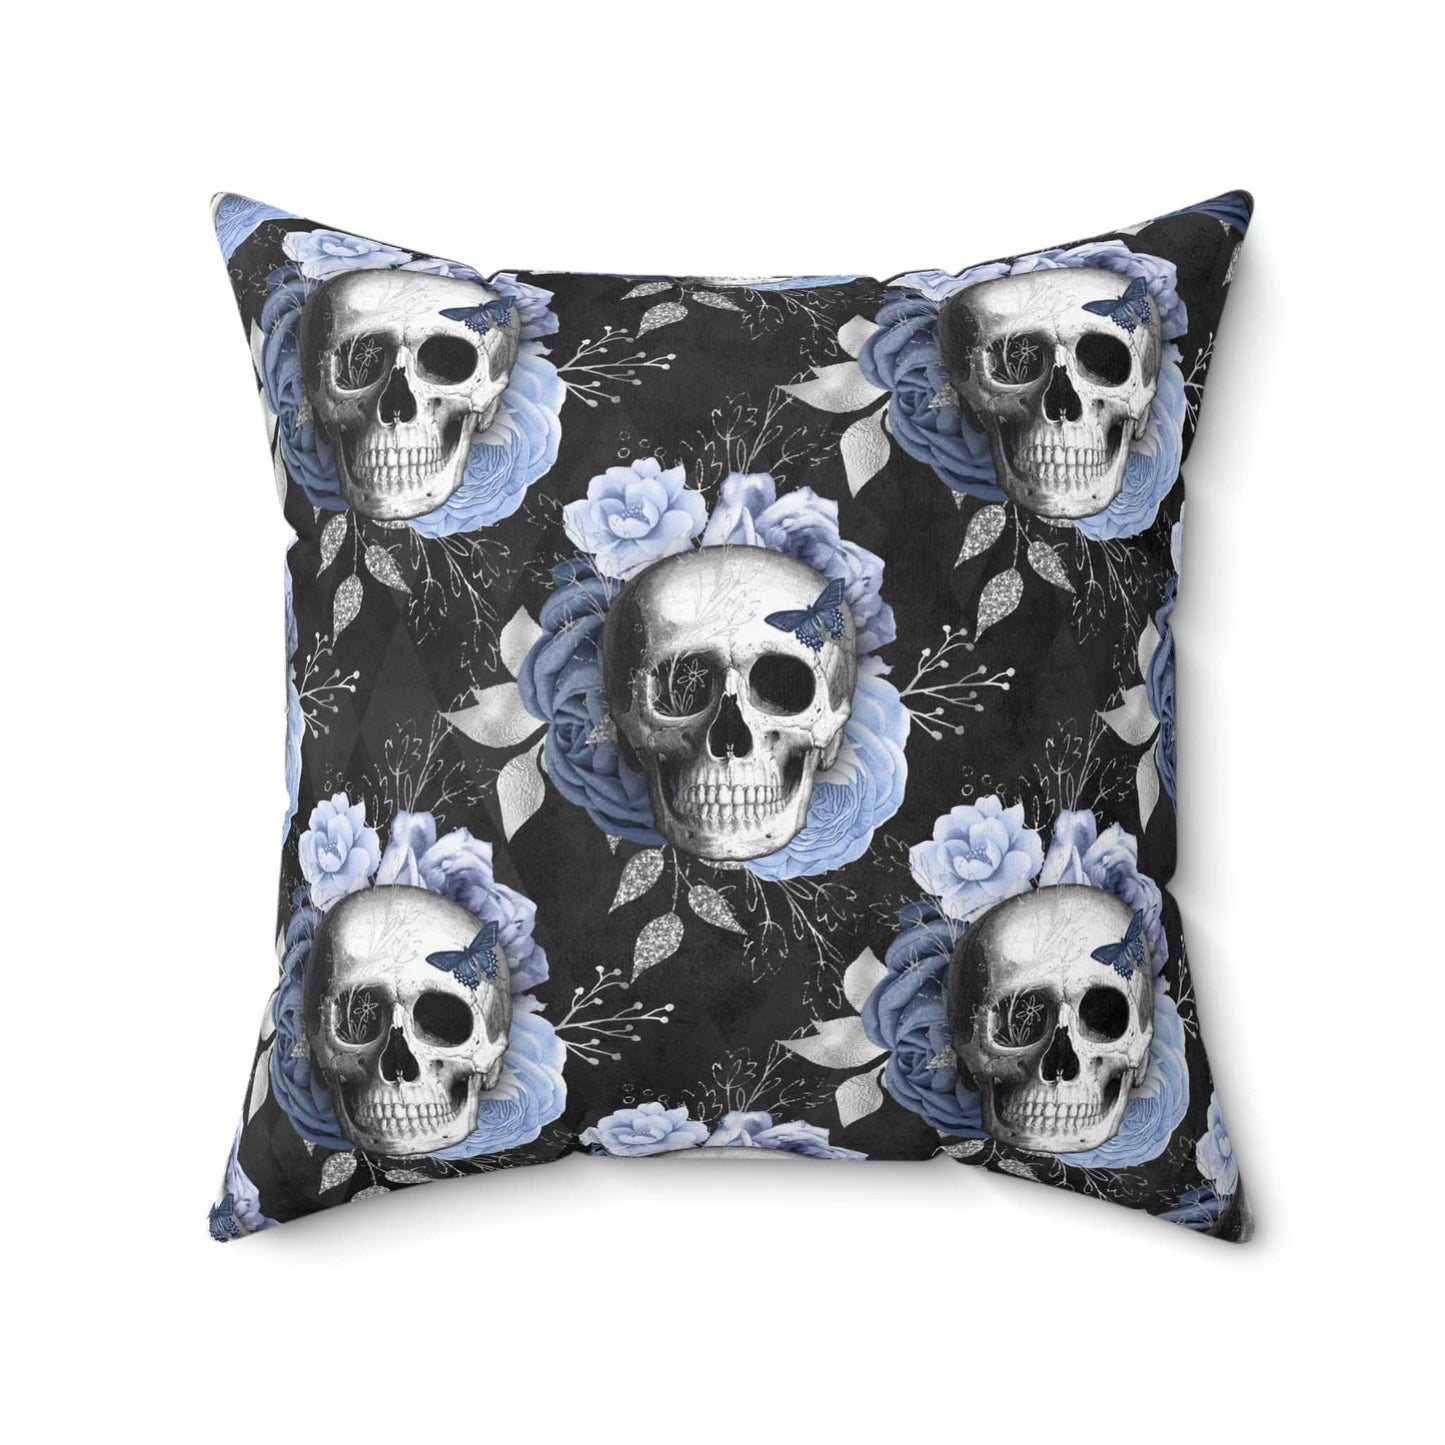 Kate McEnroe New York Floral Skull Square Pillow Cover Throw Pillow Covers